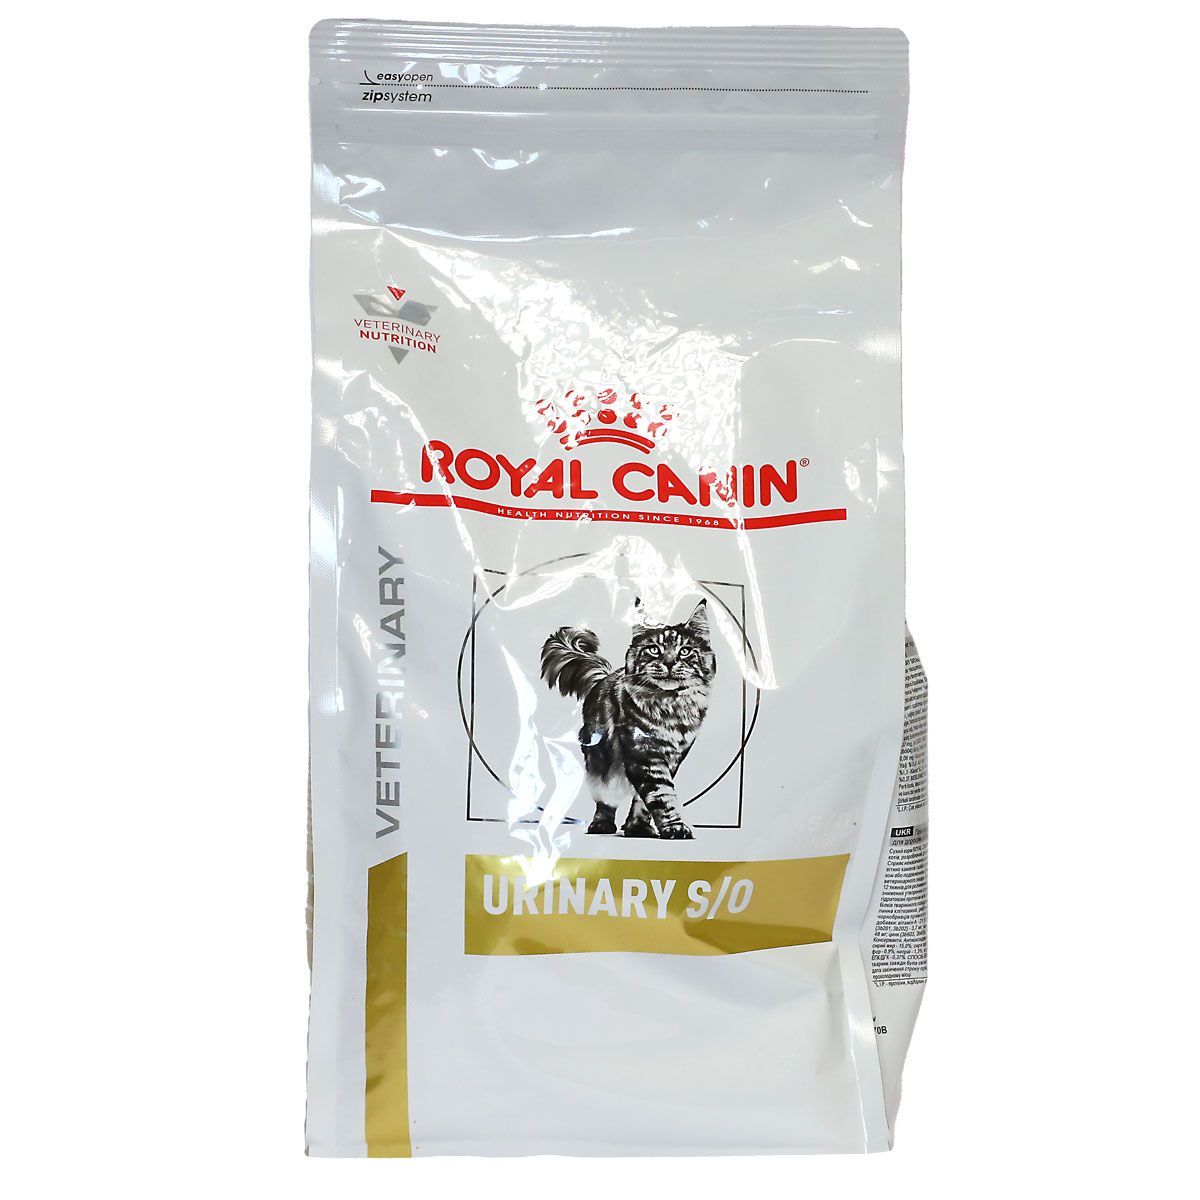 Royal Canin Veterinary Urinary S/O pour chat